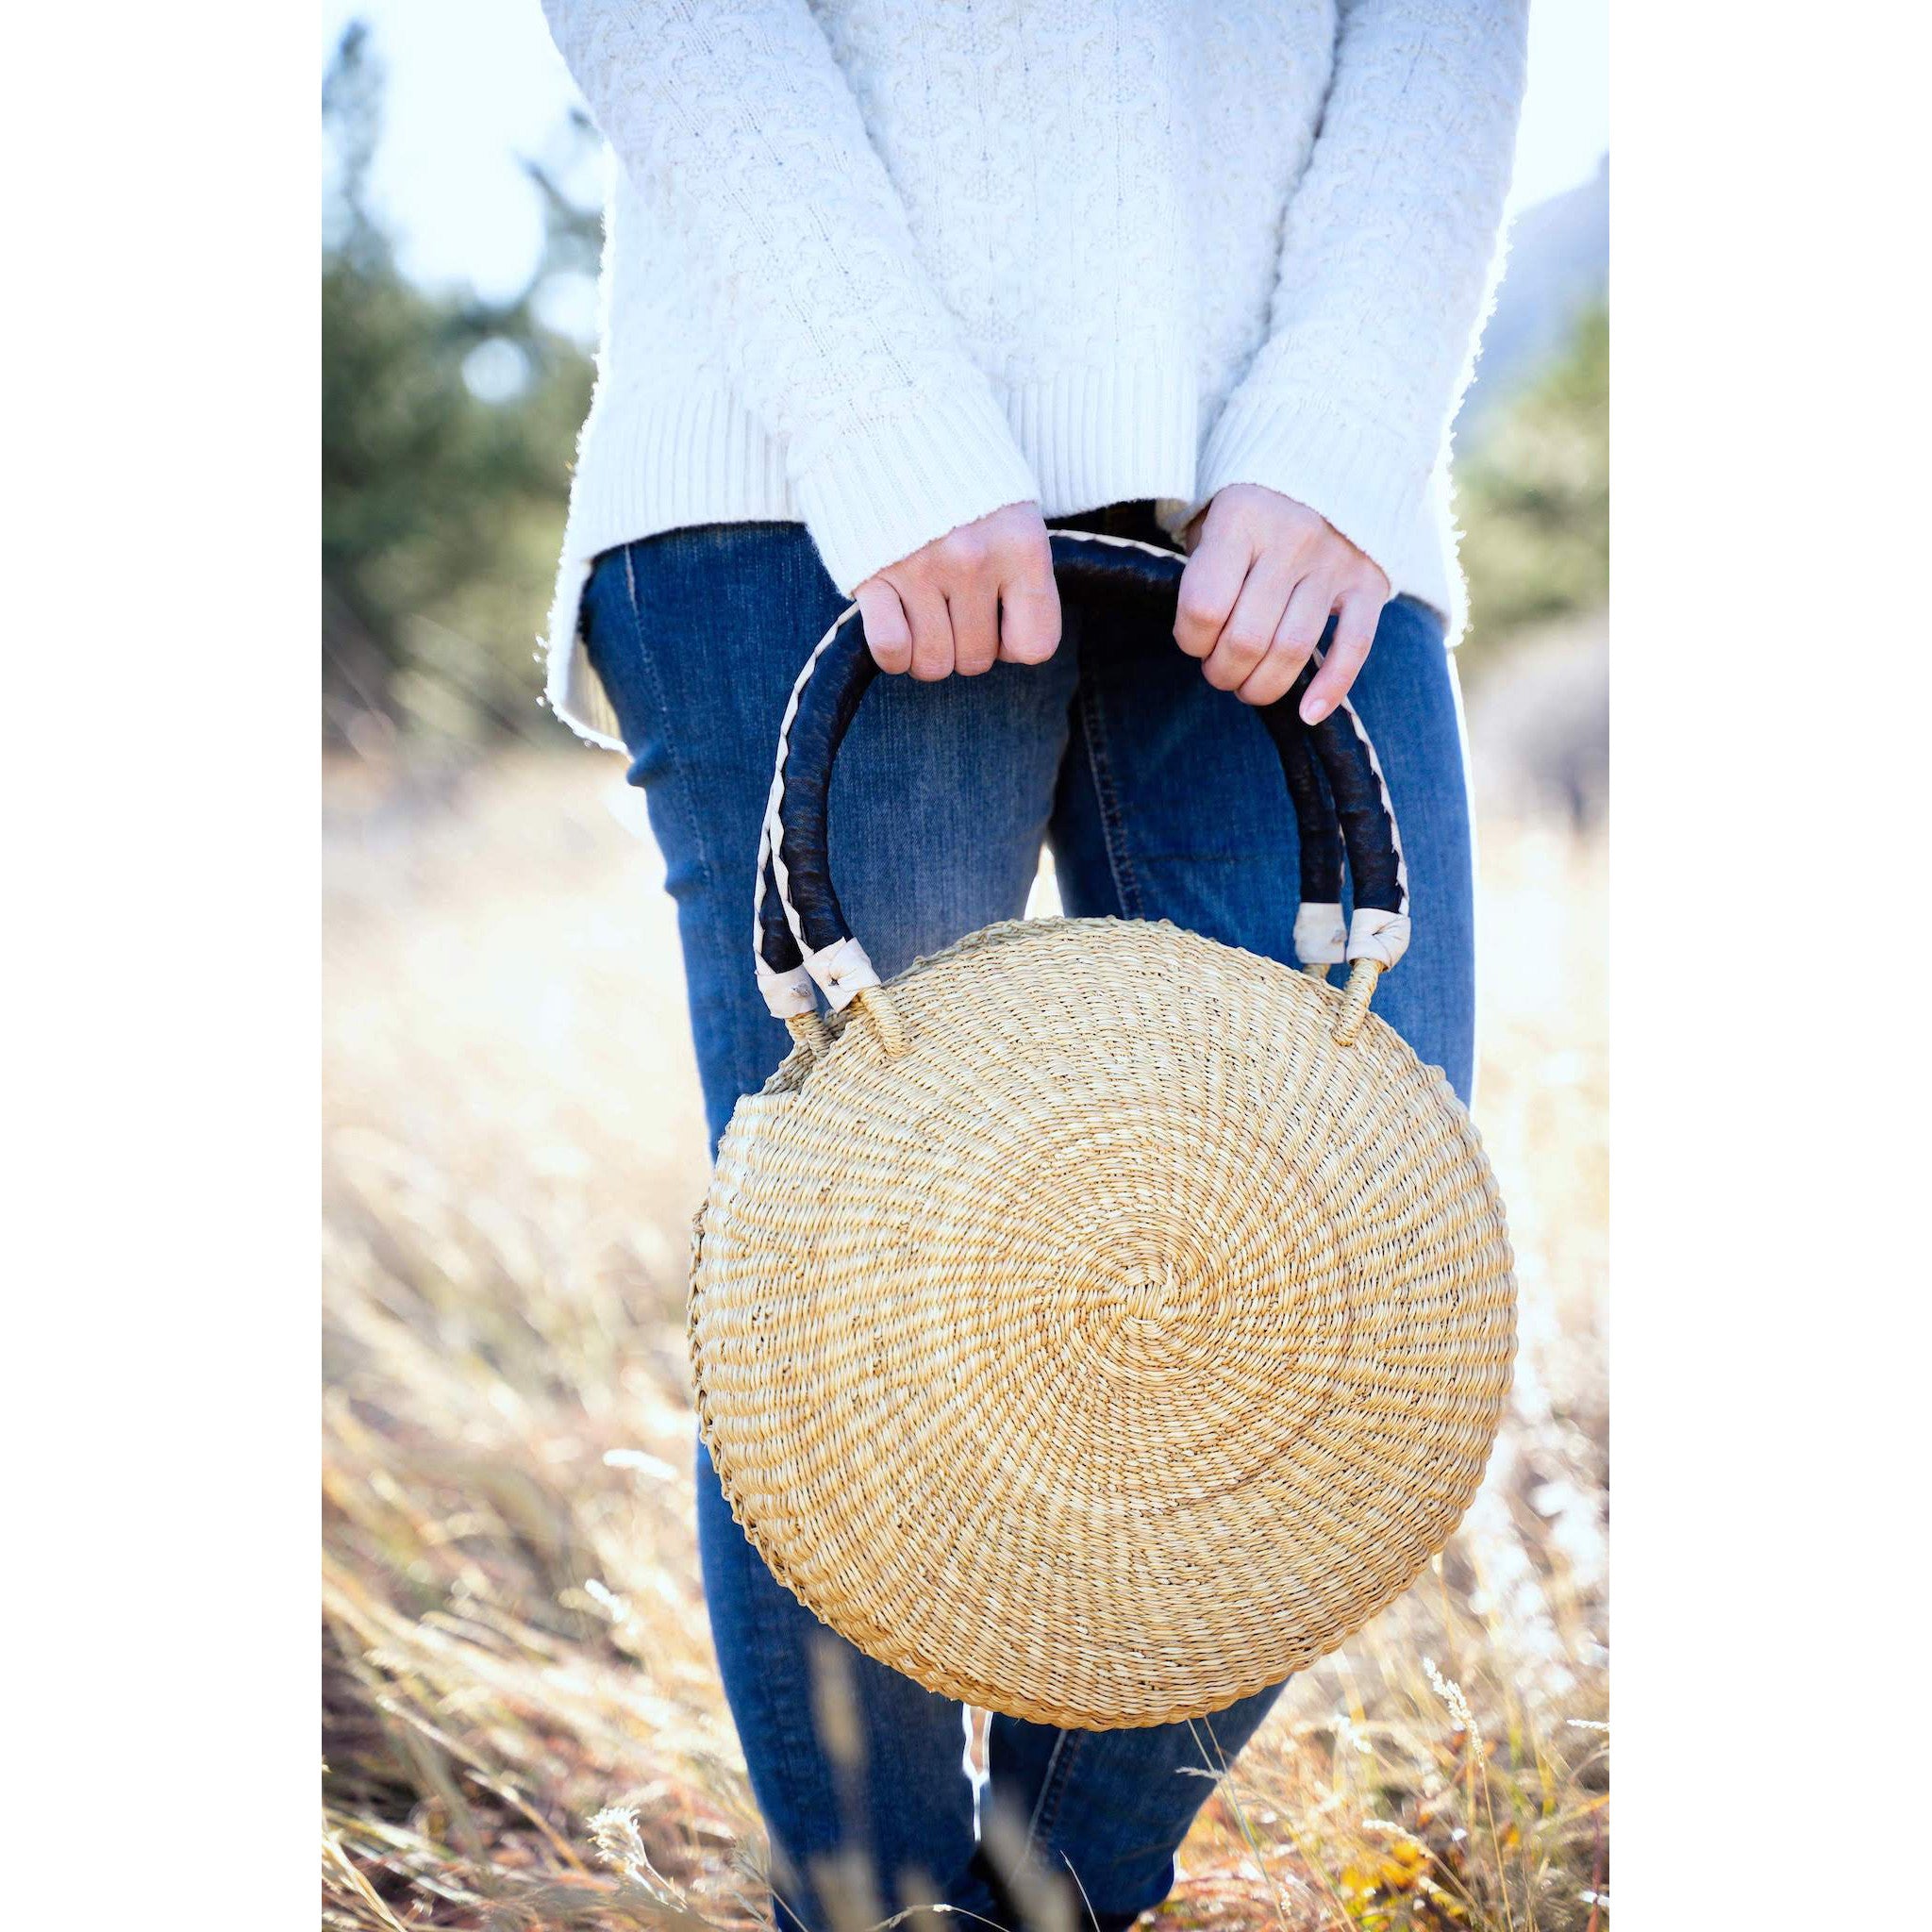 Natural Hand-Woven Straw Bag, Womens Summer Beach Boho Tote Bag Purse  Vintage Round Handle Ring Large Casual Handbag || Rural Handmade-Redefine  Supply to Build Sustainable Brands